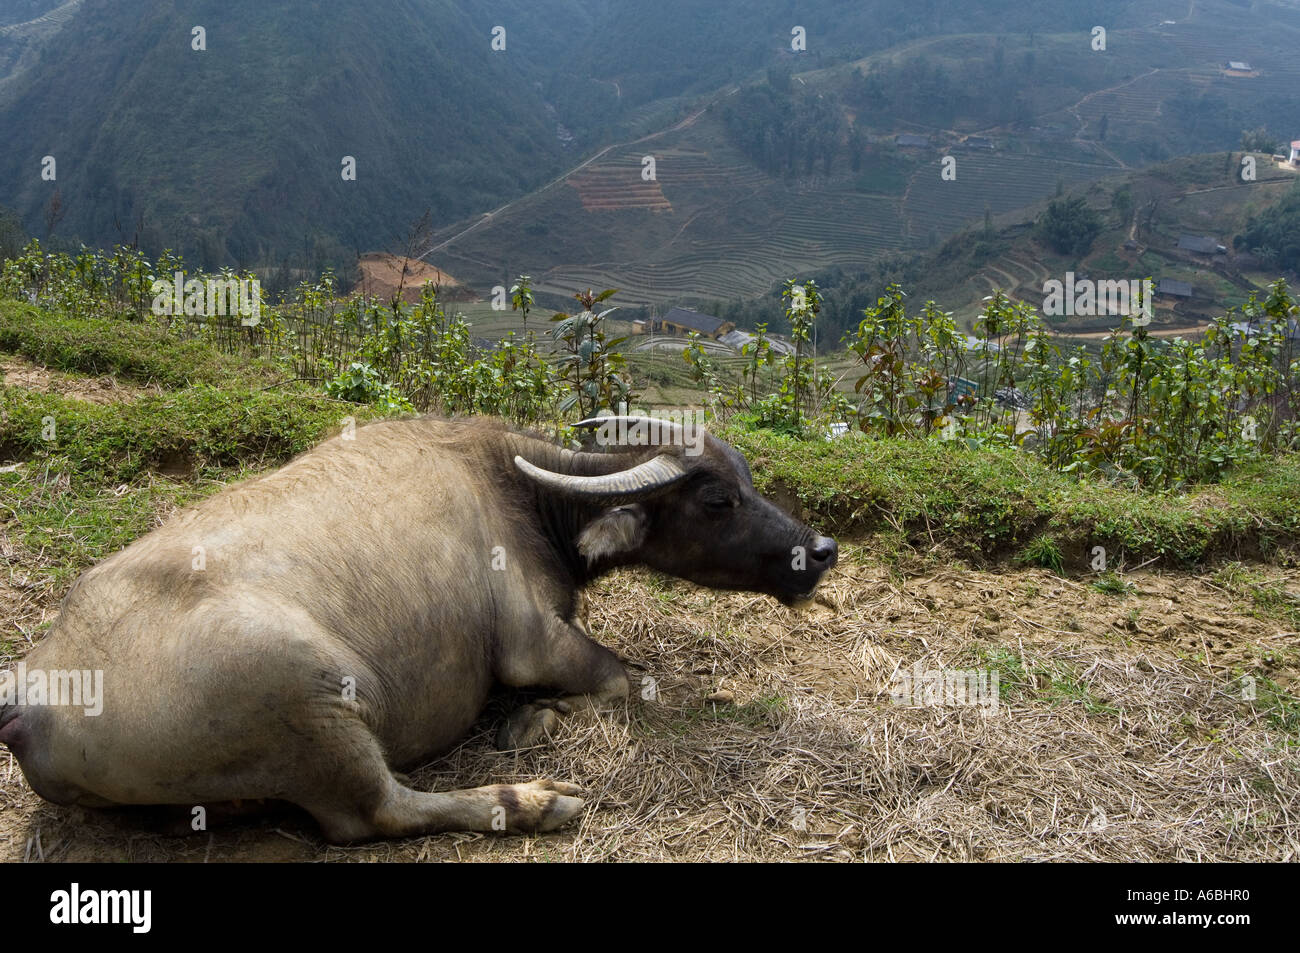 A water buffalo takes in the view Sapa North Vietnam Stock Photo